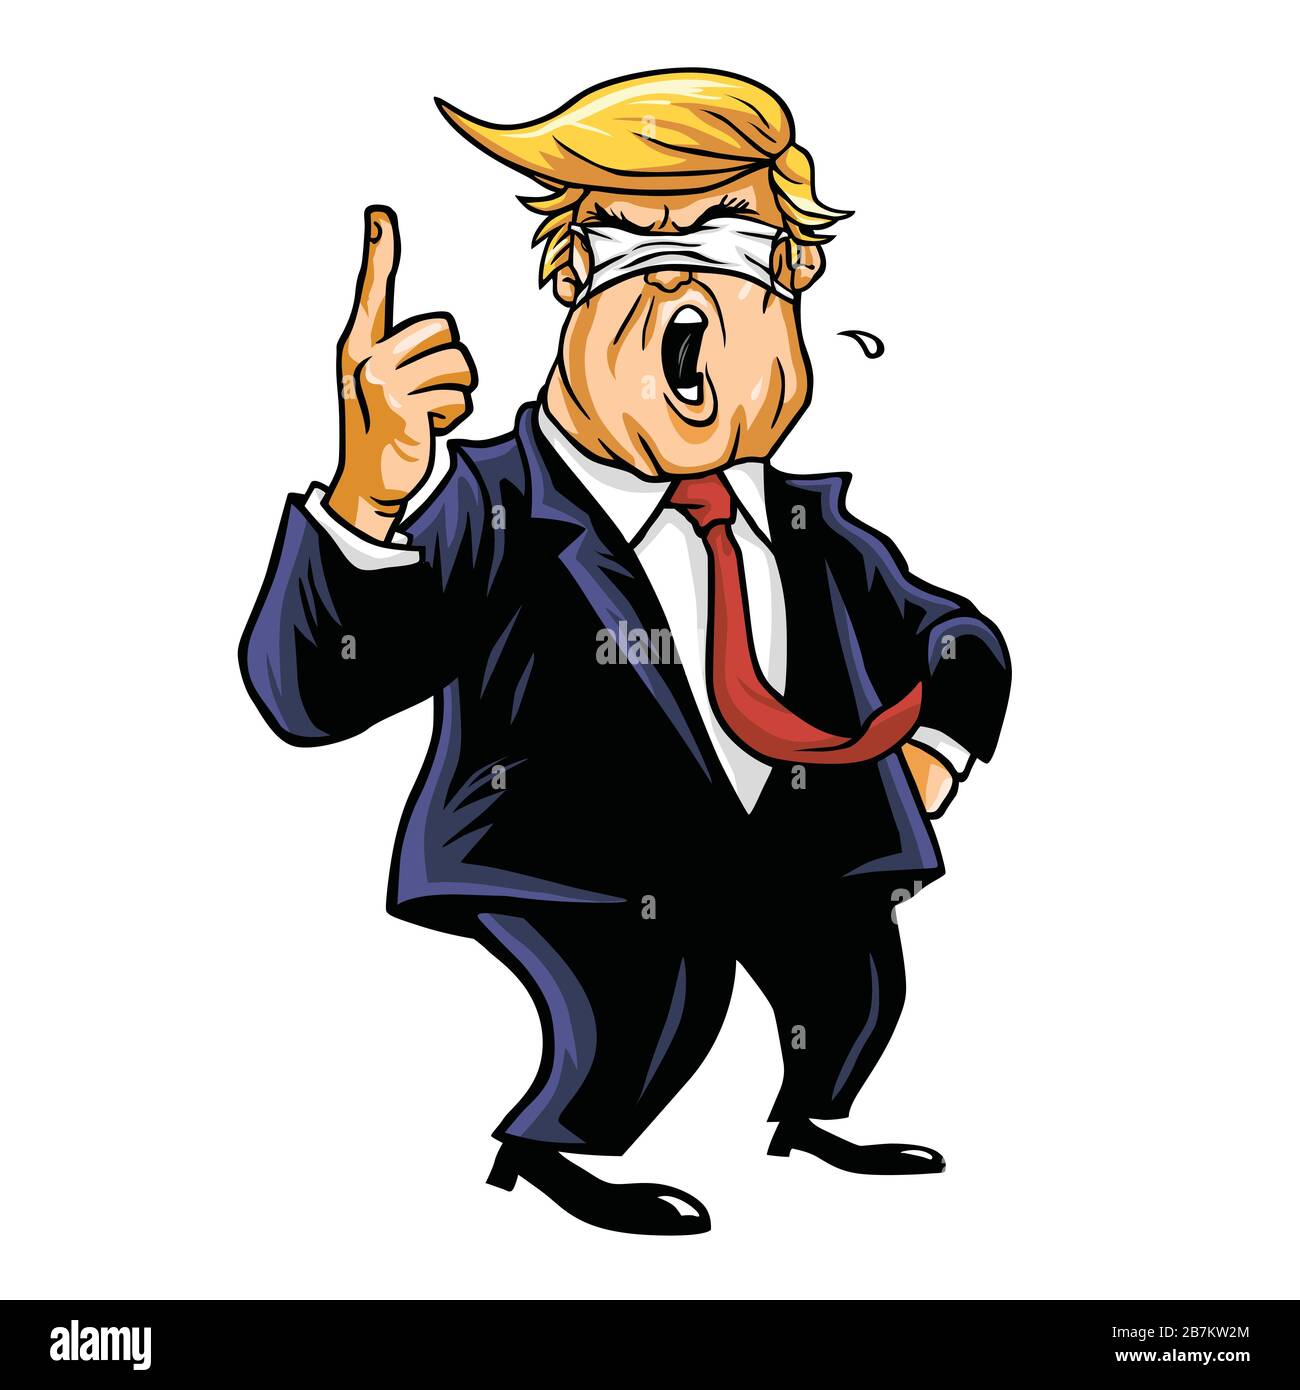 Donald Trump with Anti Corona Virus Covid 19 Mask on Eyes Blinded Cartoon Vector Drawing. March 17 , 2020 Stock Vector